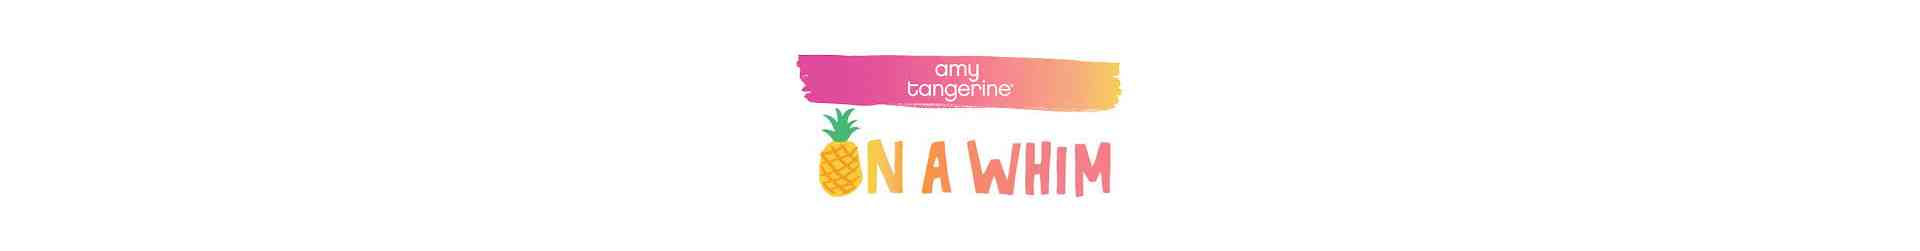 ON A WHIM - Amy Tangerine